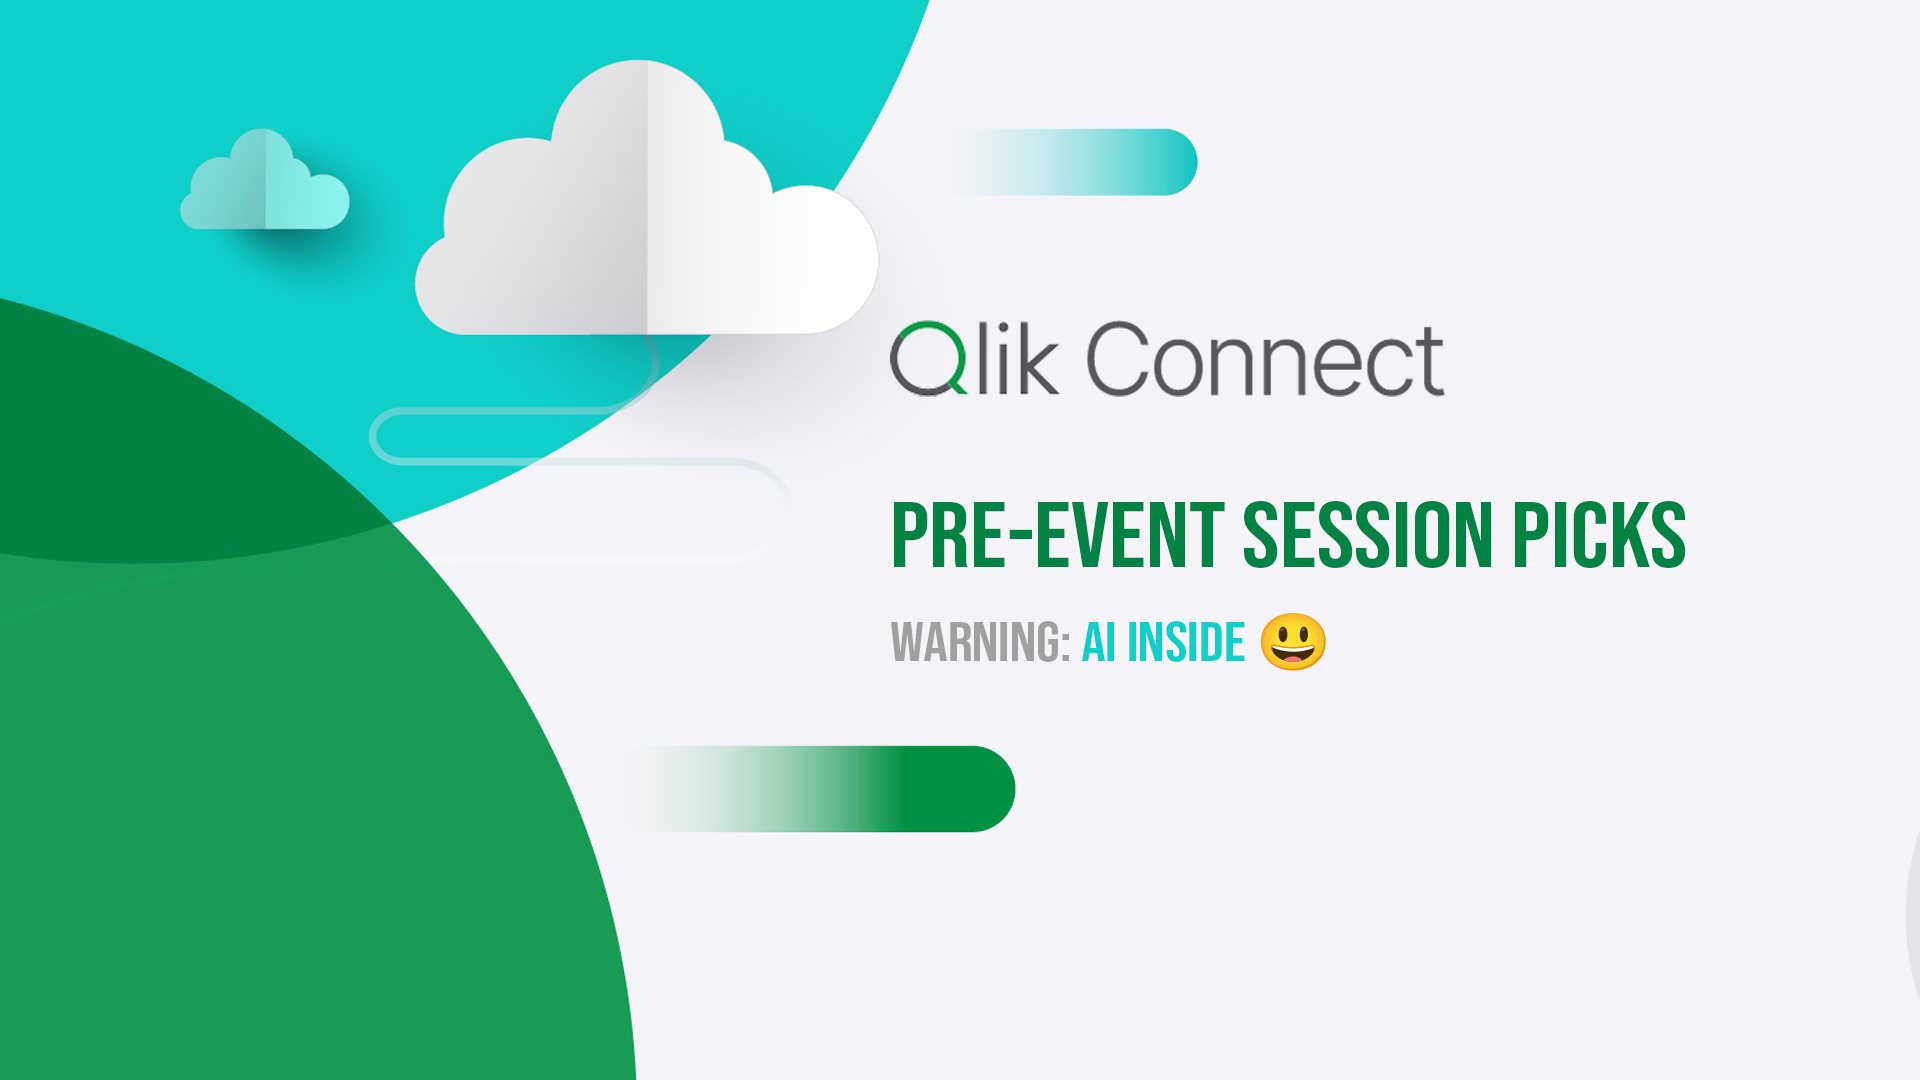 Qlik Connect - It's not all about AI... but it is for me!